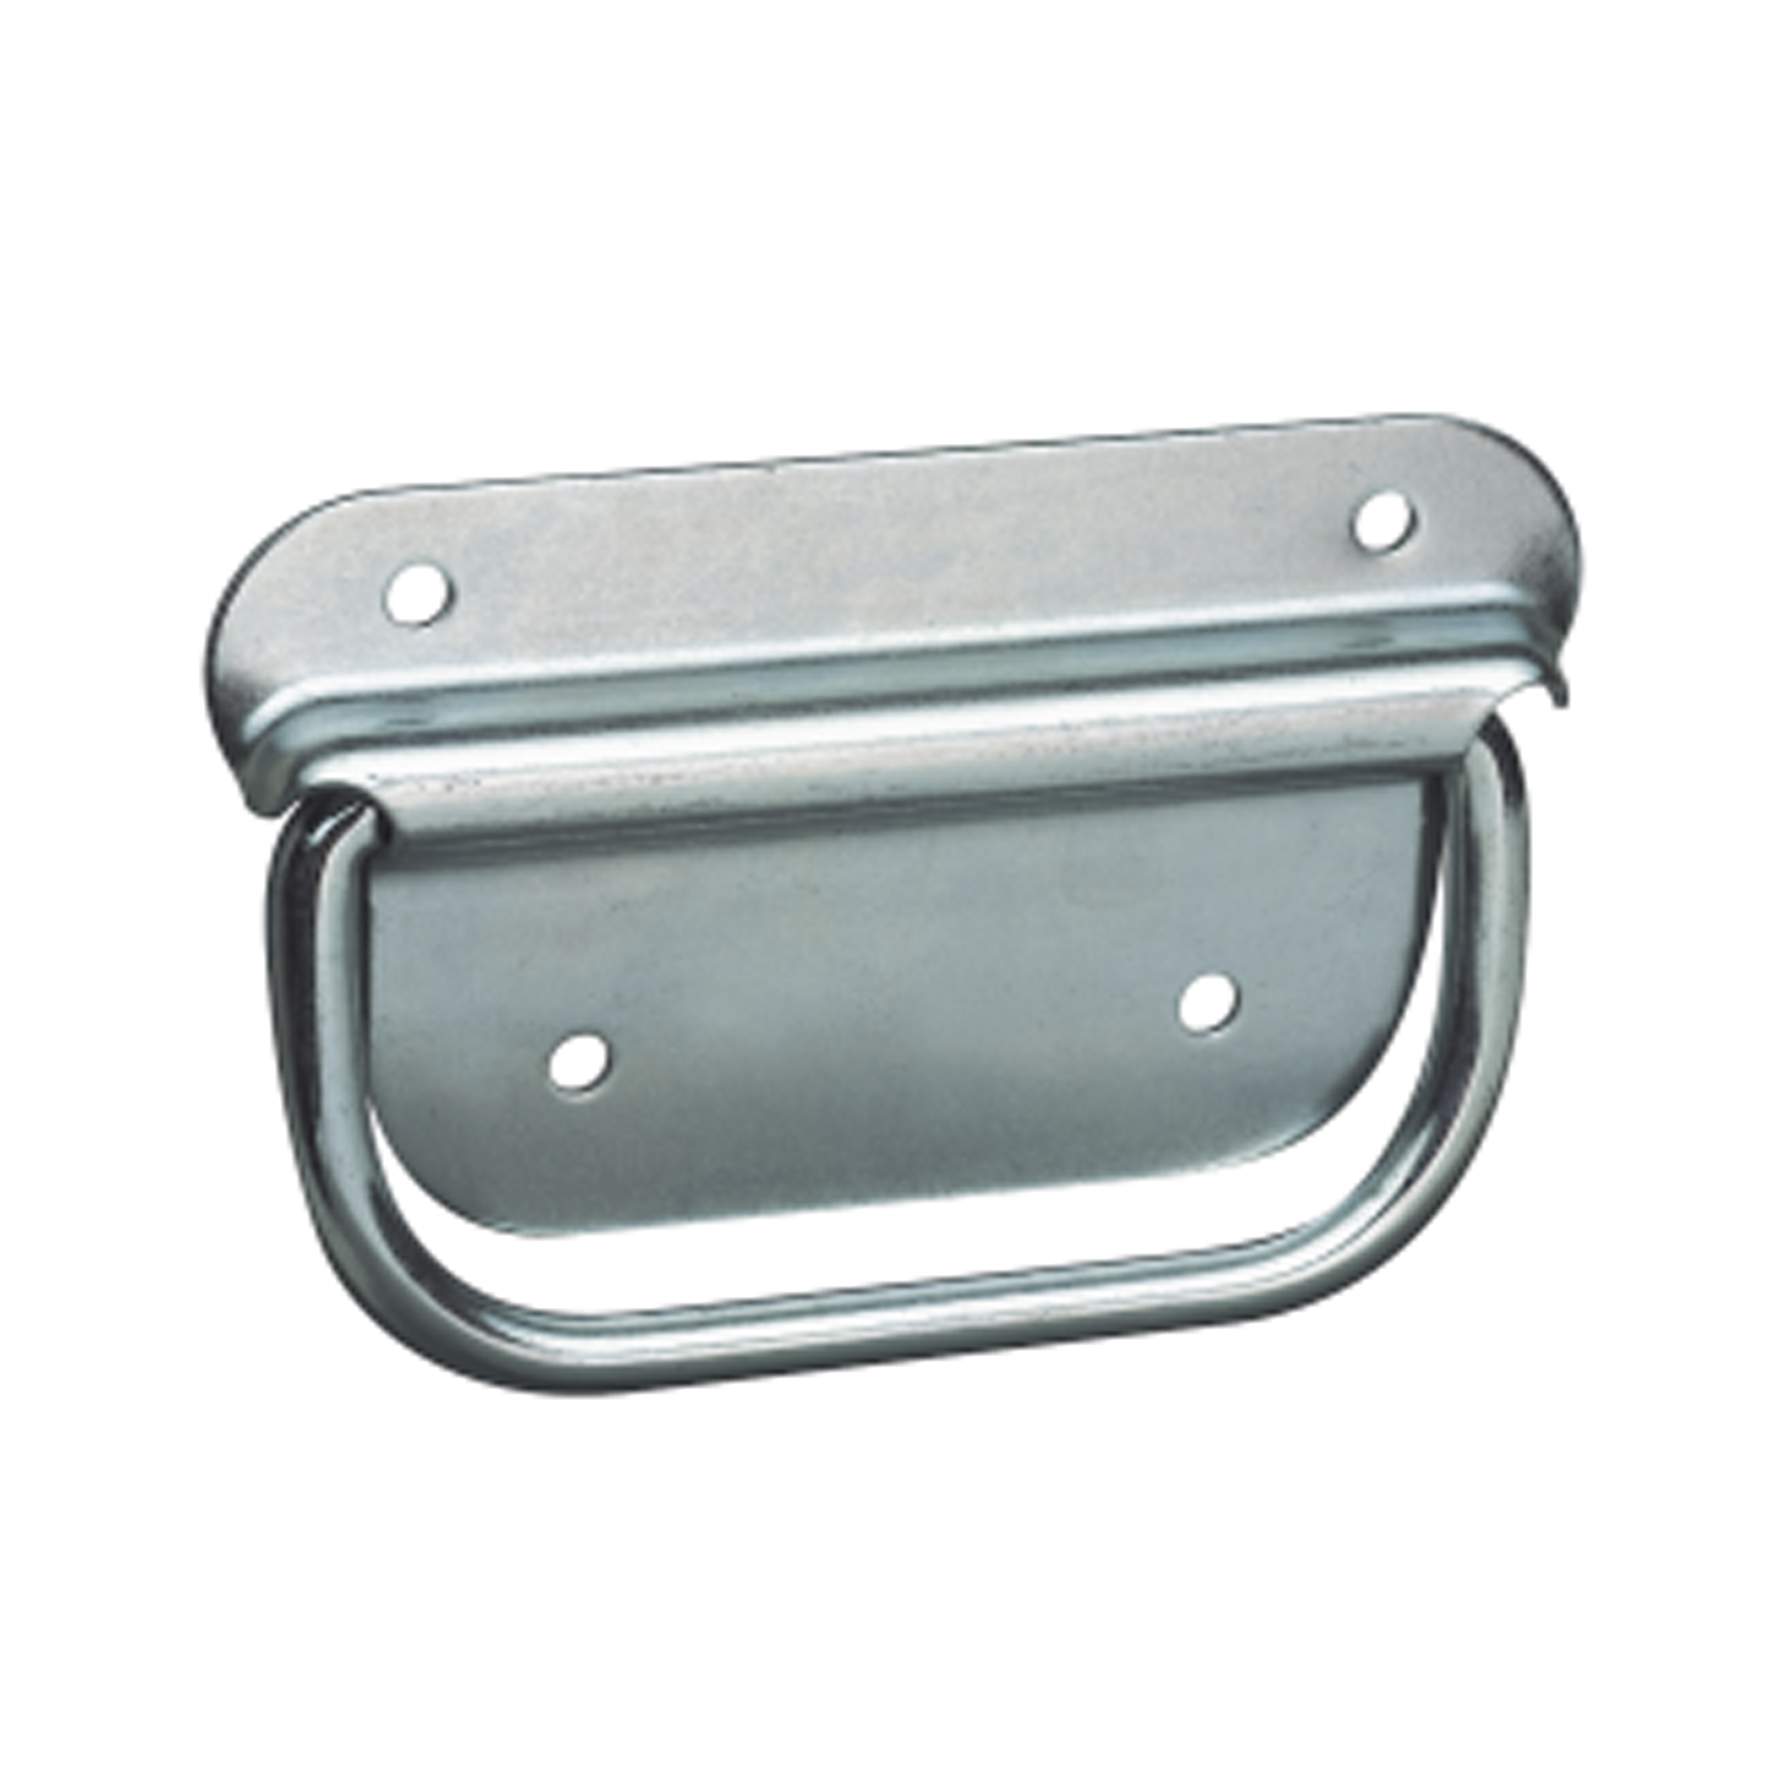 Canteen handle, galvanized steel L96xH54mm.